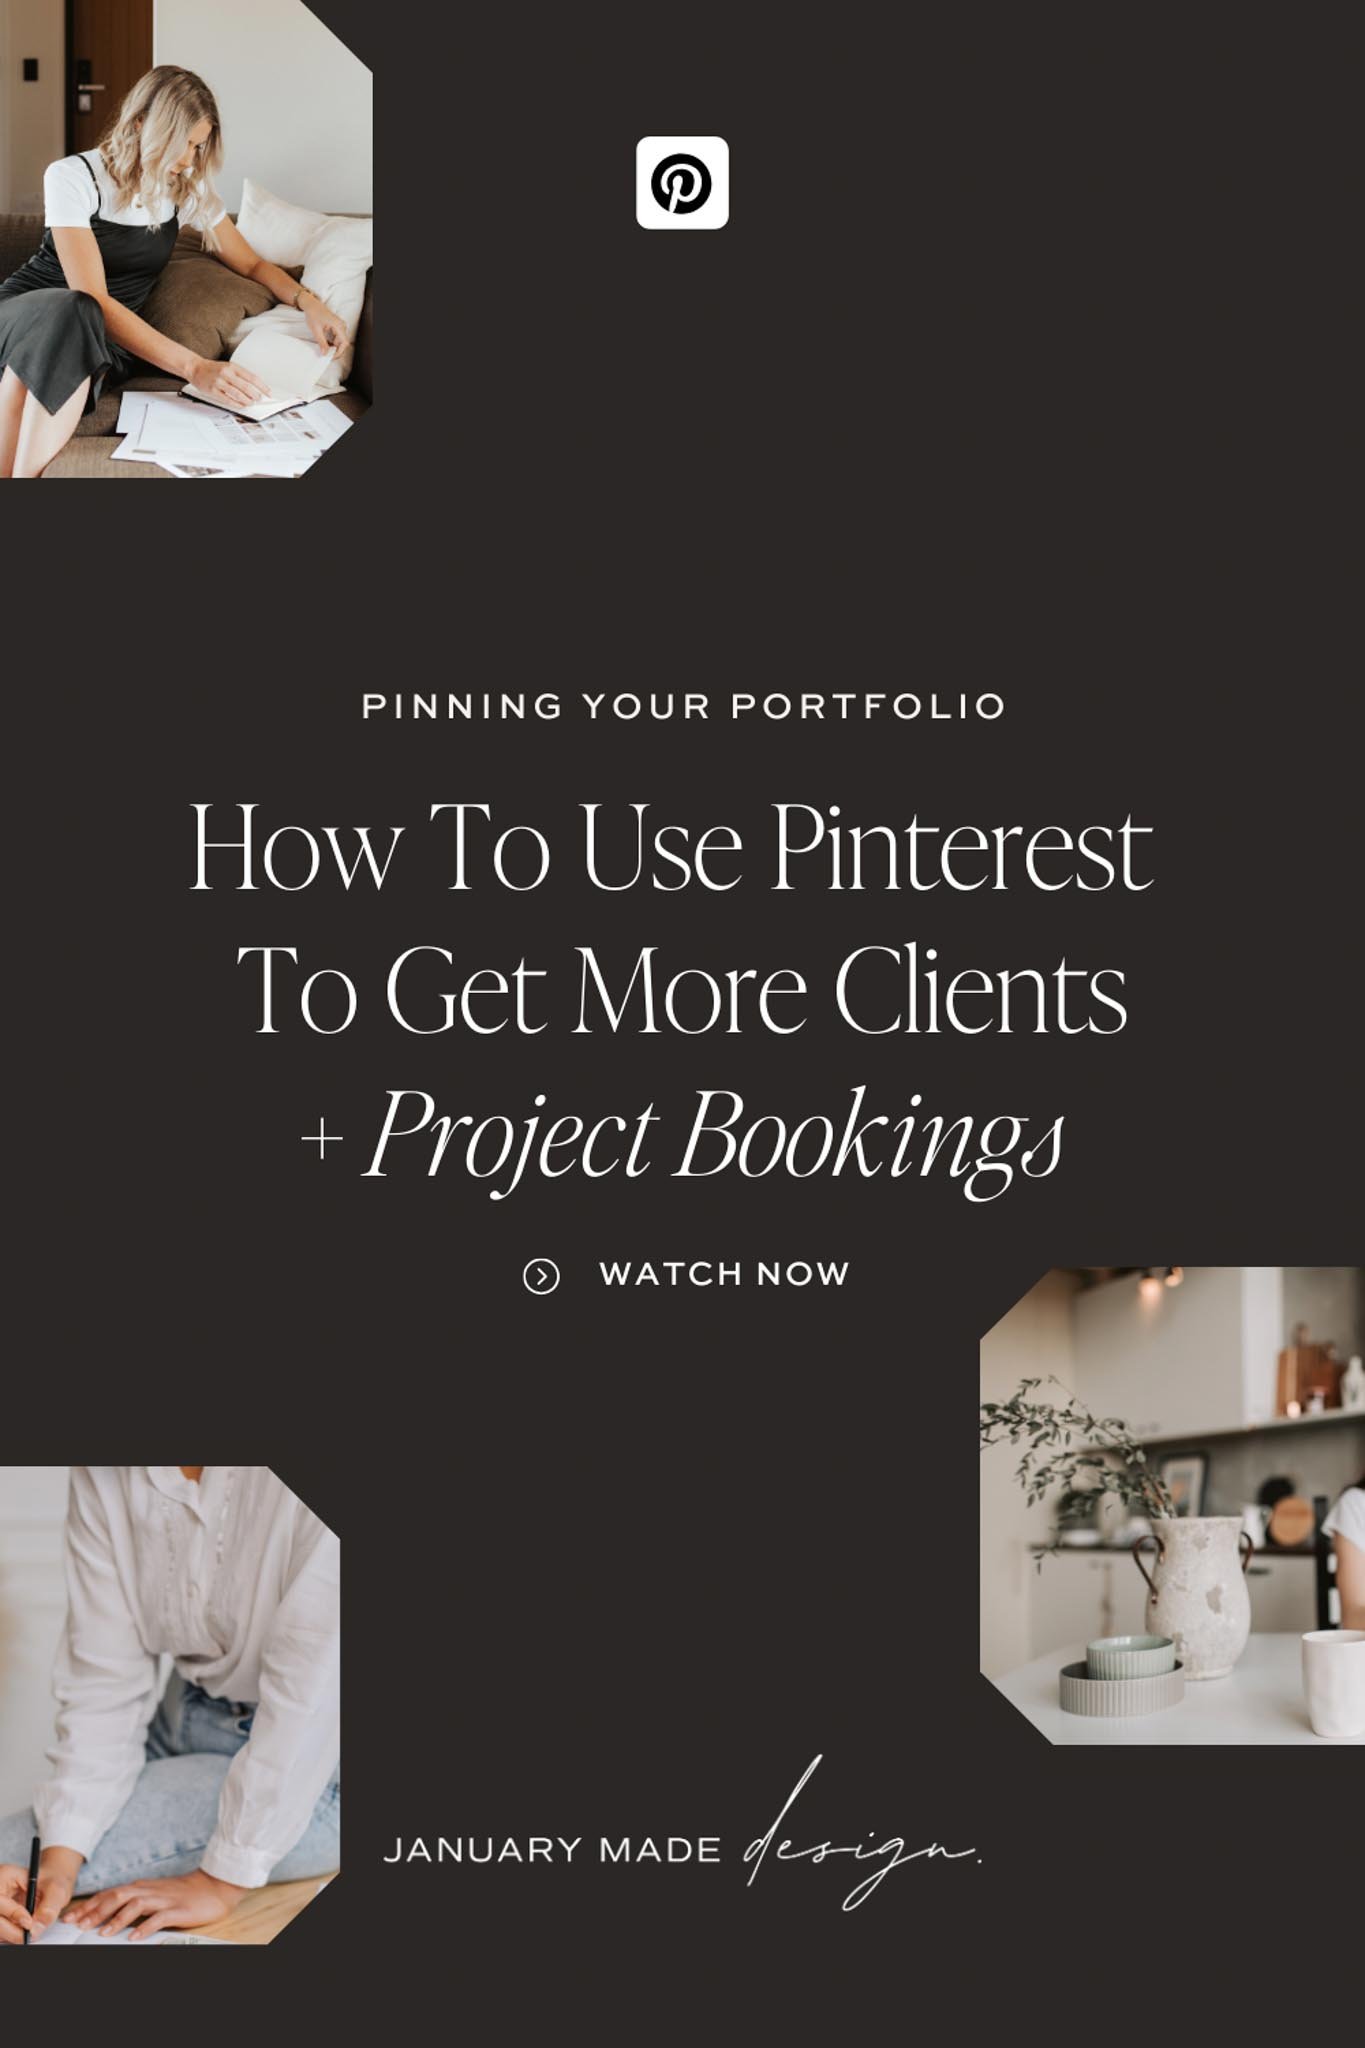 Pinning Your Portfolio_ How To Use Pinterest To Get More Clients & Project Bookings-06.jpg